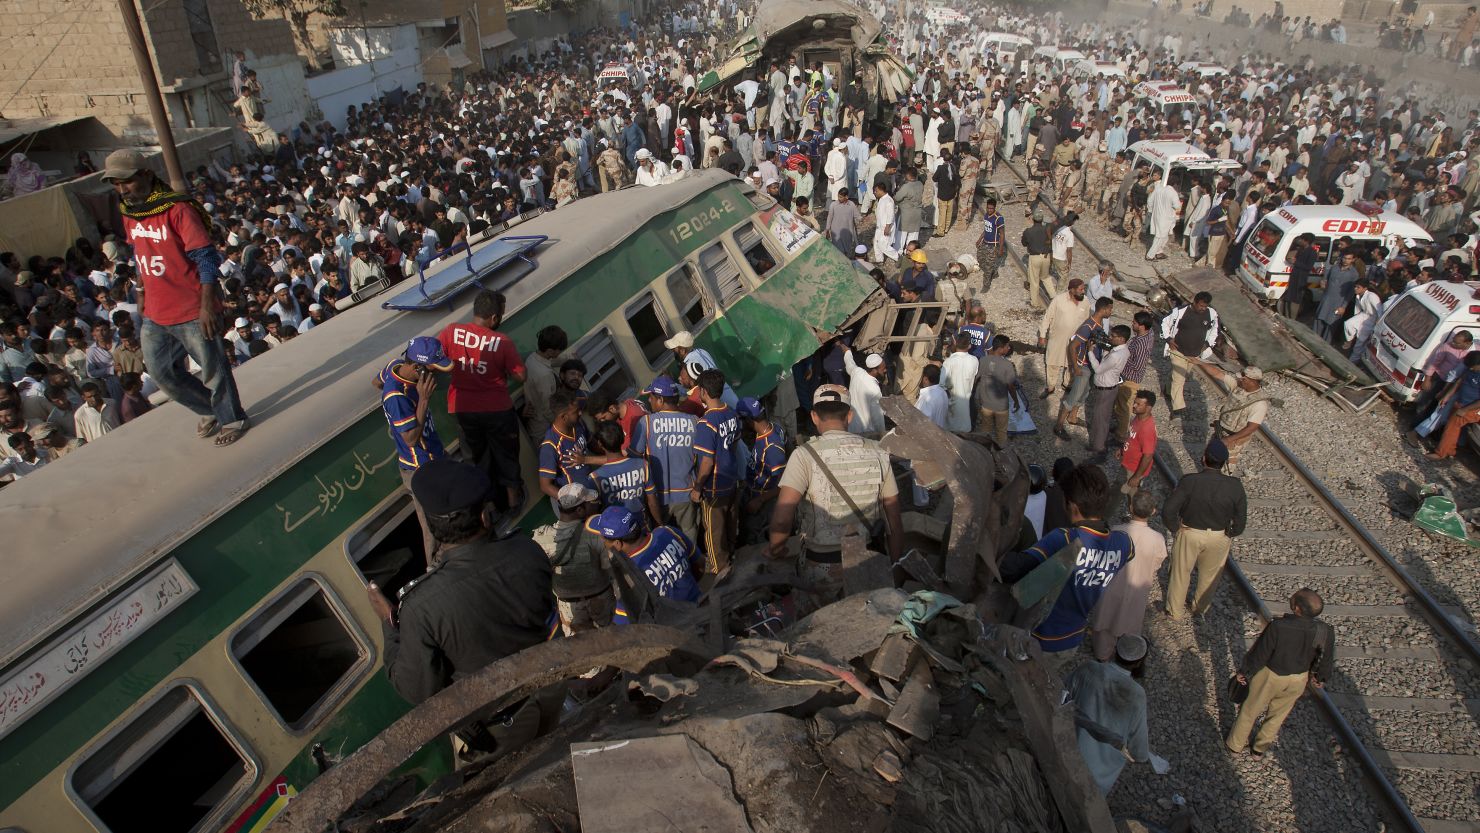 Bystanders search the wreckage for victims of a train crash in Karachi, Pakistan, November 3. 